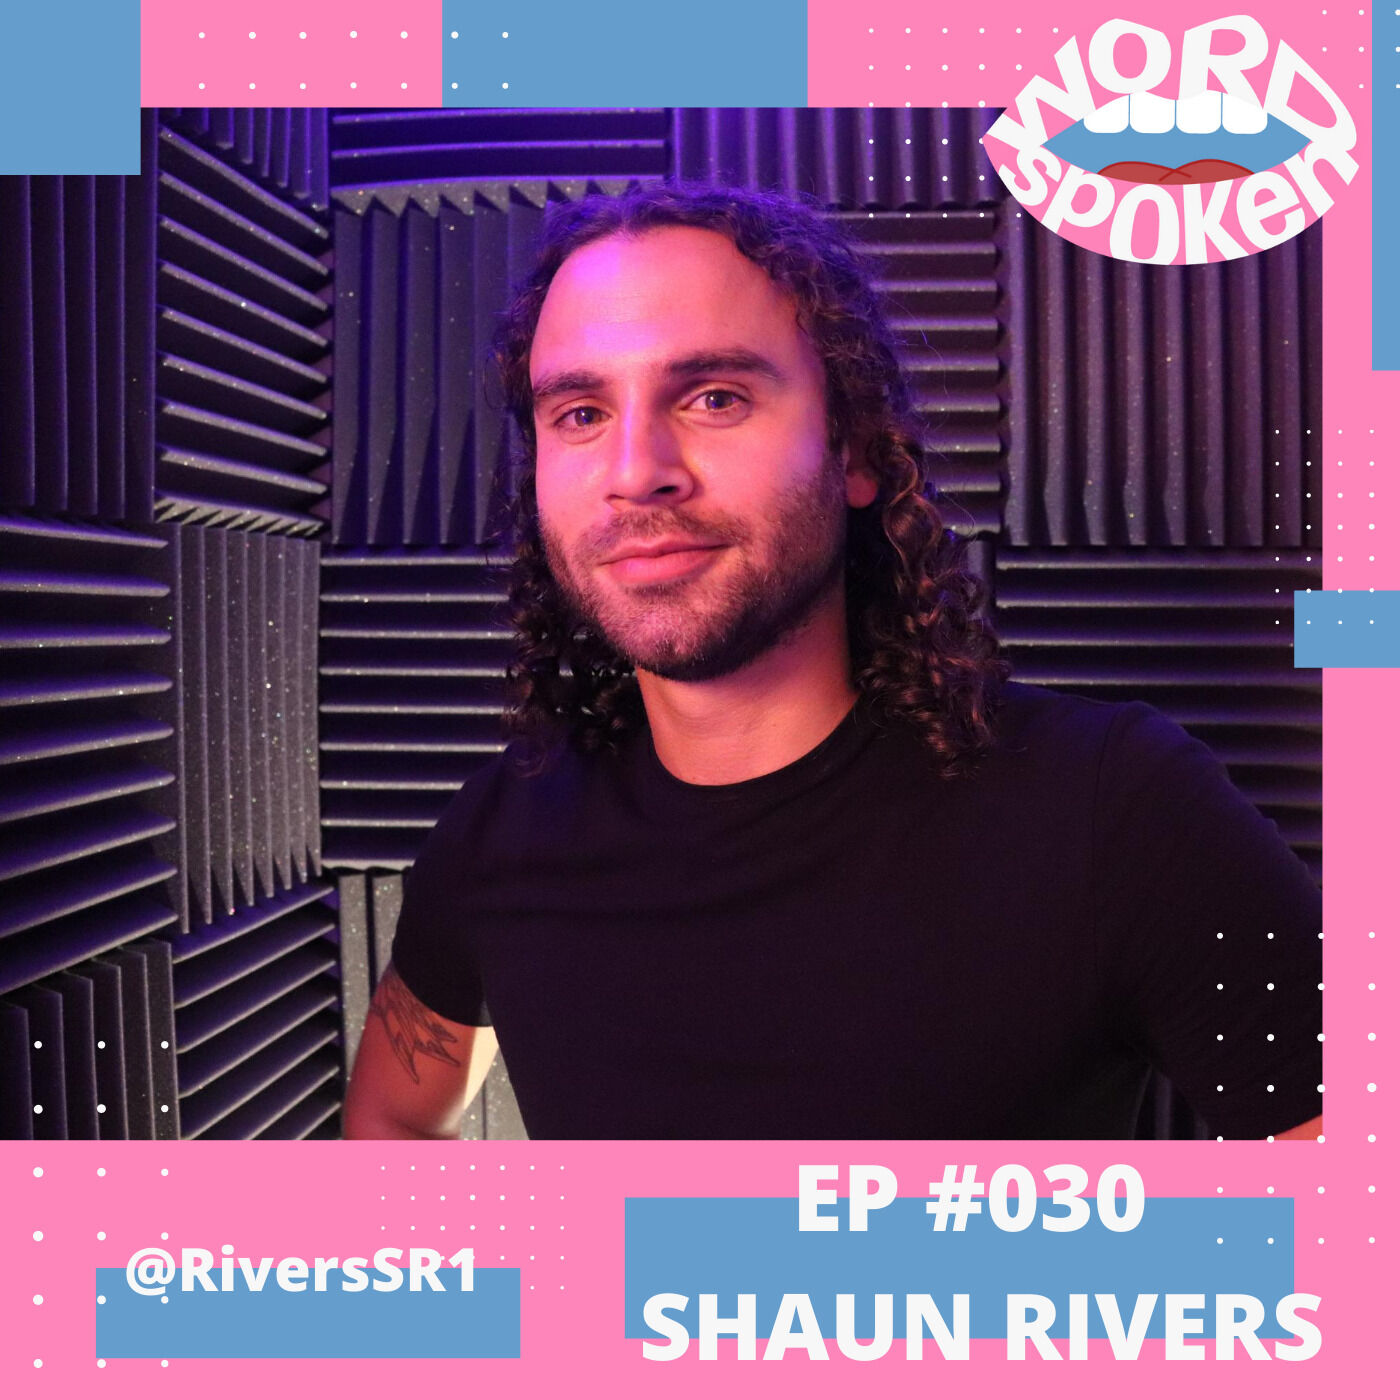 Shaun Rivers: Human Contact, Transformation and the Apocalypse